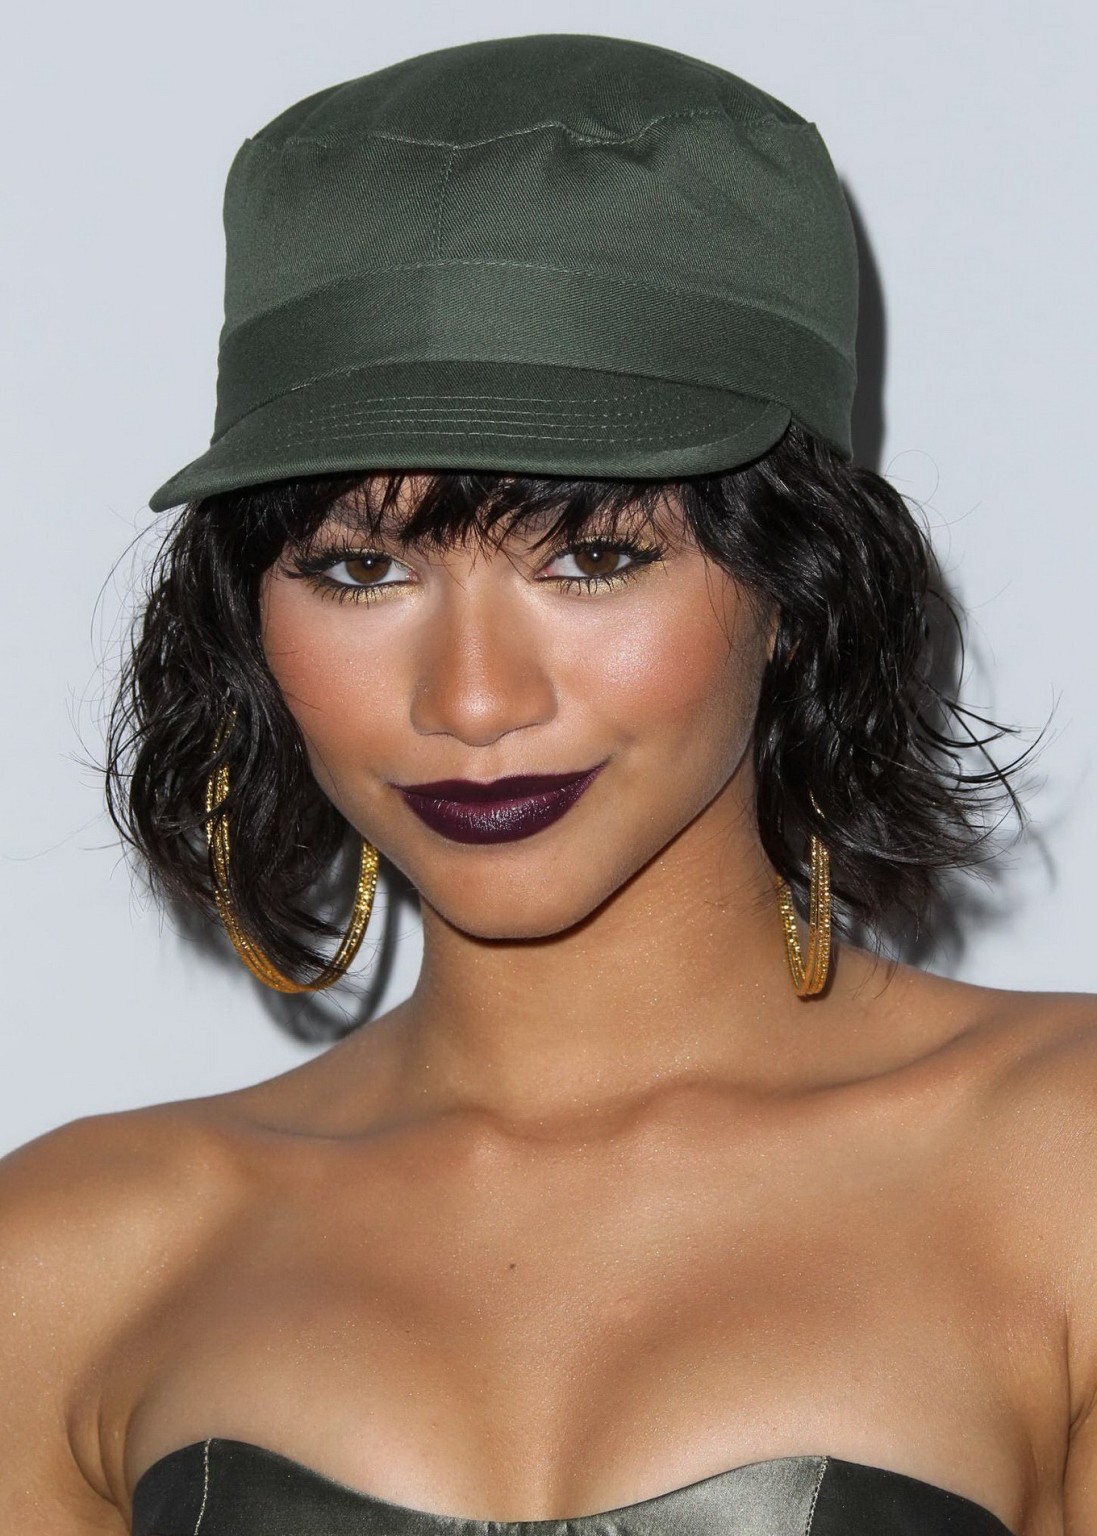 Zendaya Coleman shows off her boobs in a tiny belly top at BMI RB Hip Hop Awards #75187492